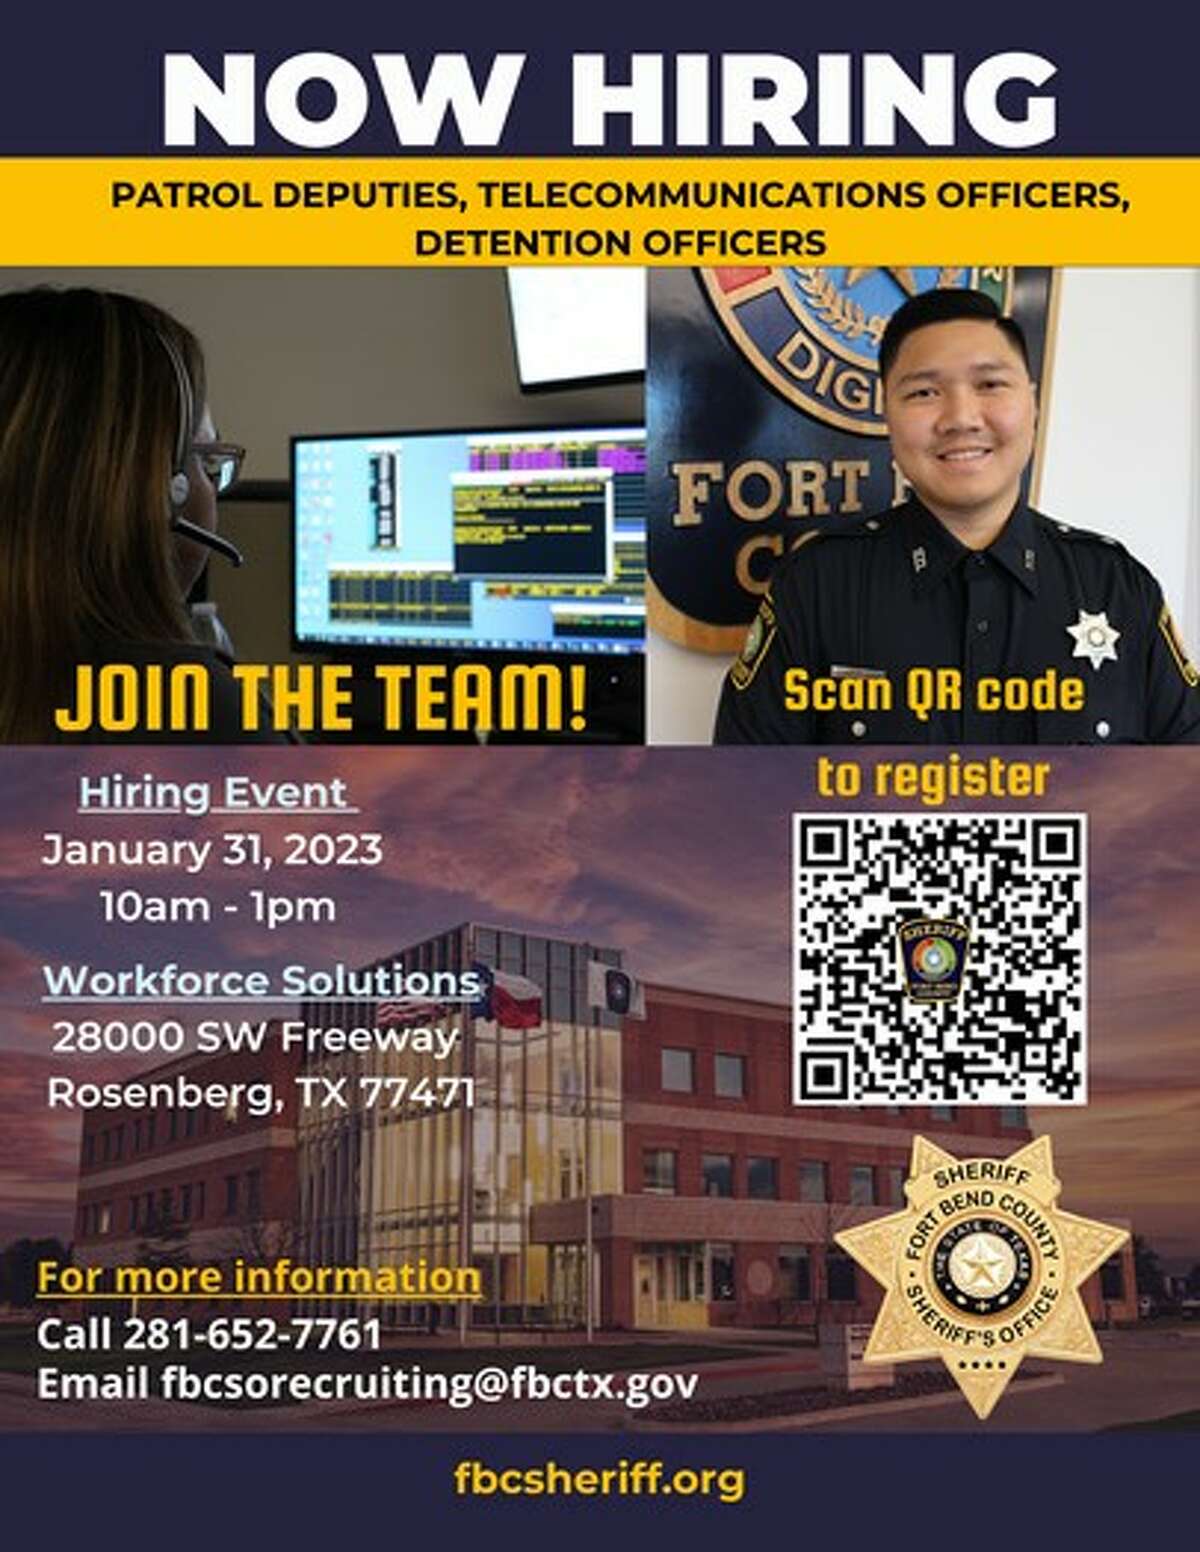 The Fort Bend County Sheriff’s Office is accepting applications to fill positions for telecommunications officers, patrol deputies and detention officers.